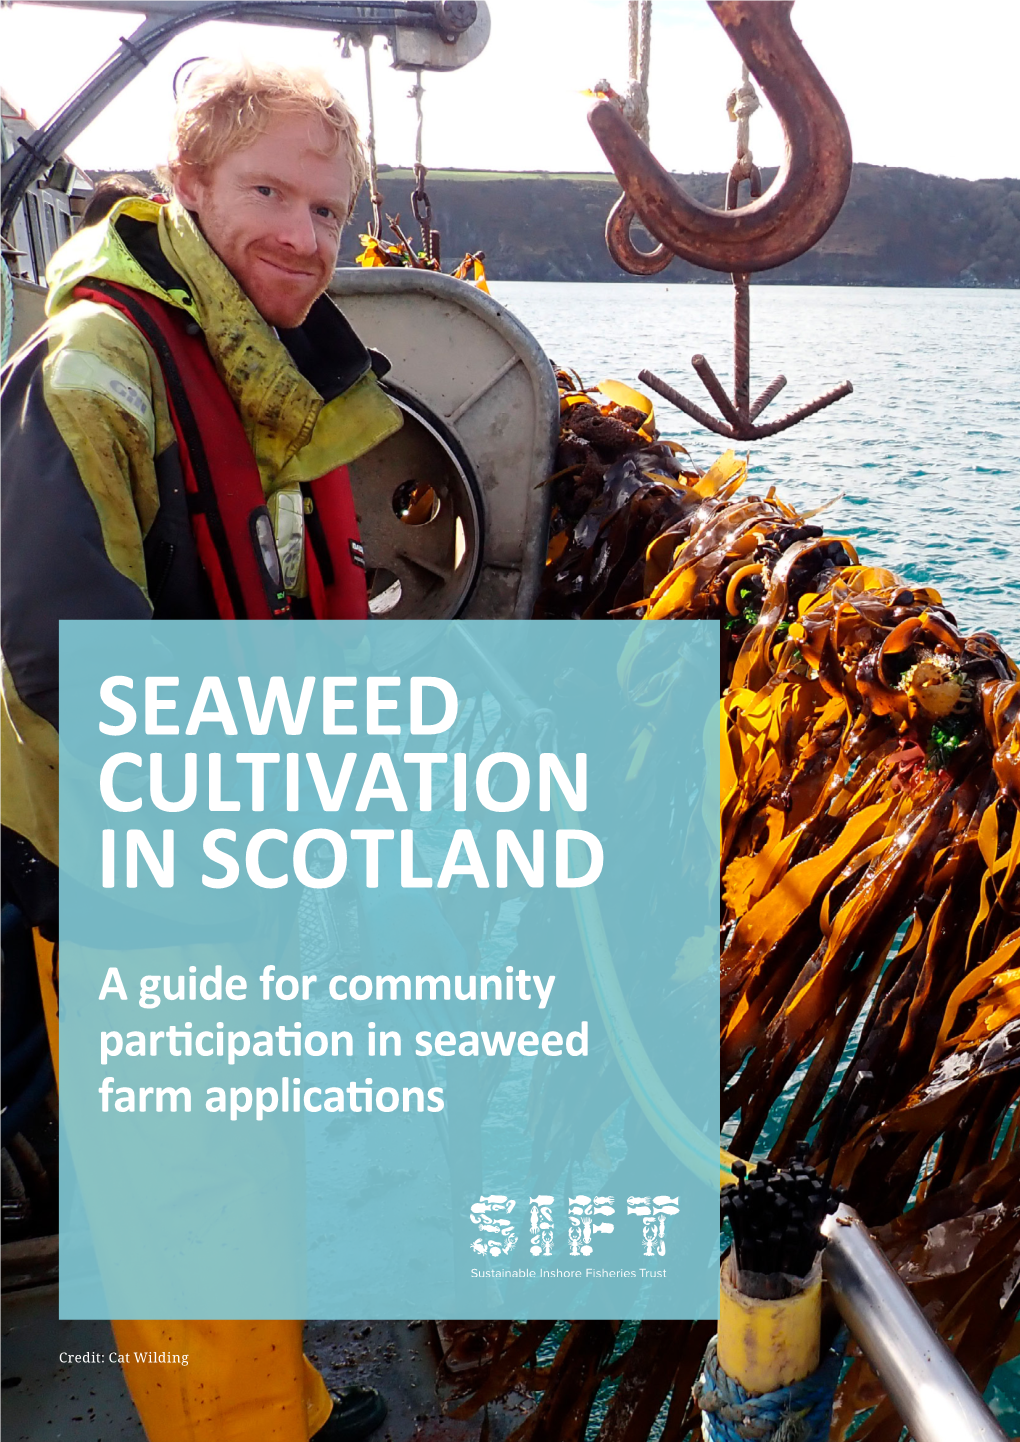 SEAWEED CULTIVATION in SCOTLAND a Guide for Community Participation in Seaweed Farm Applications